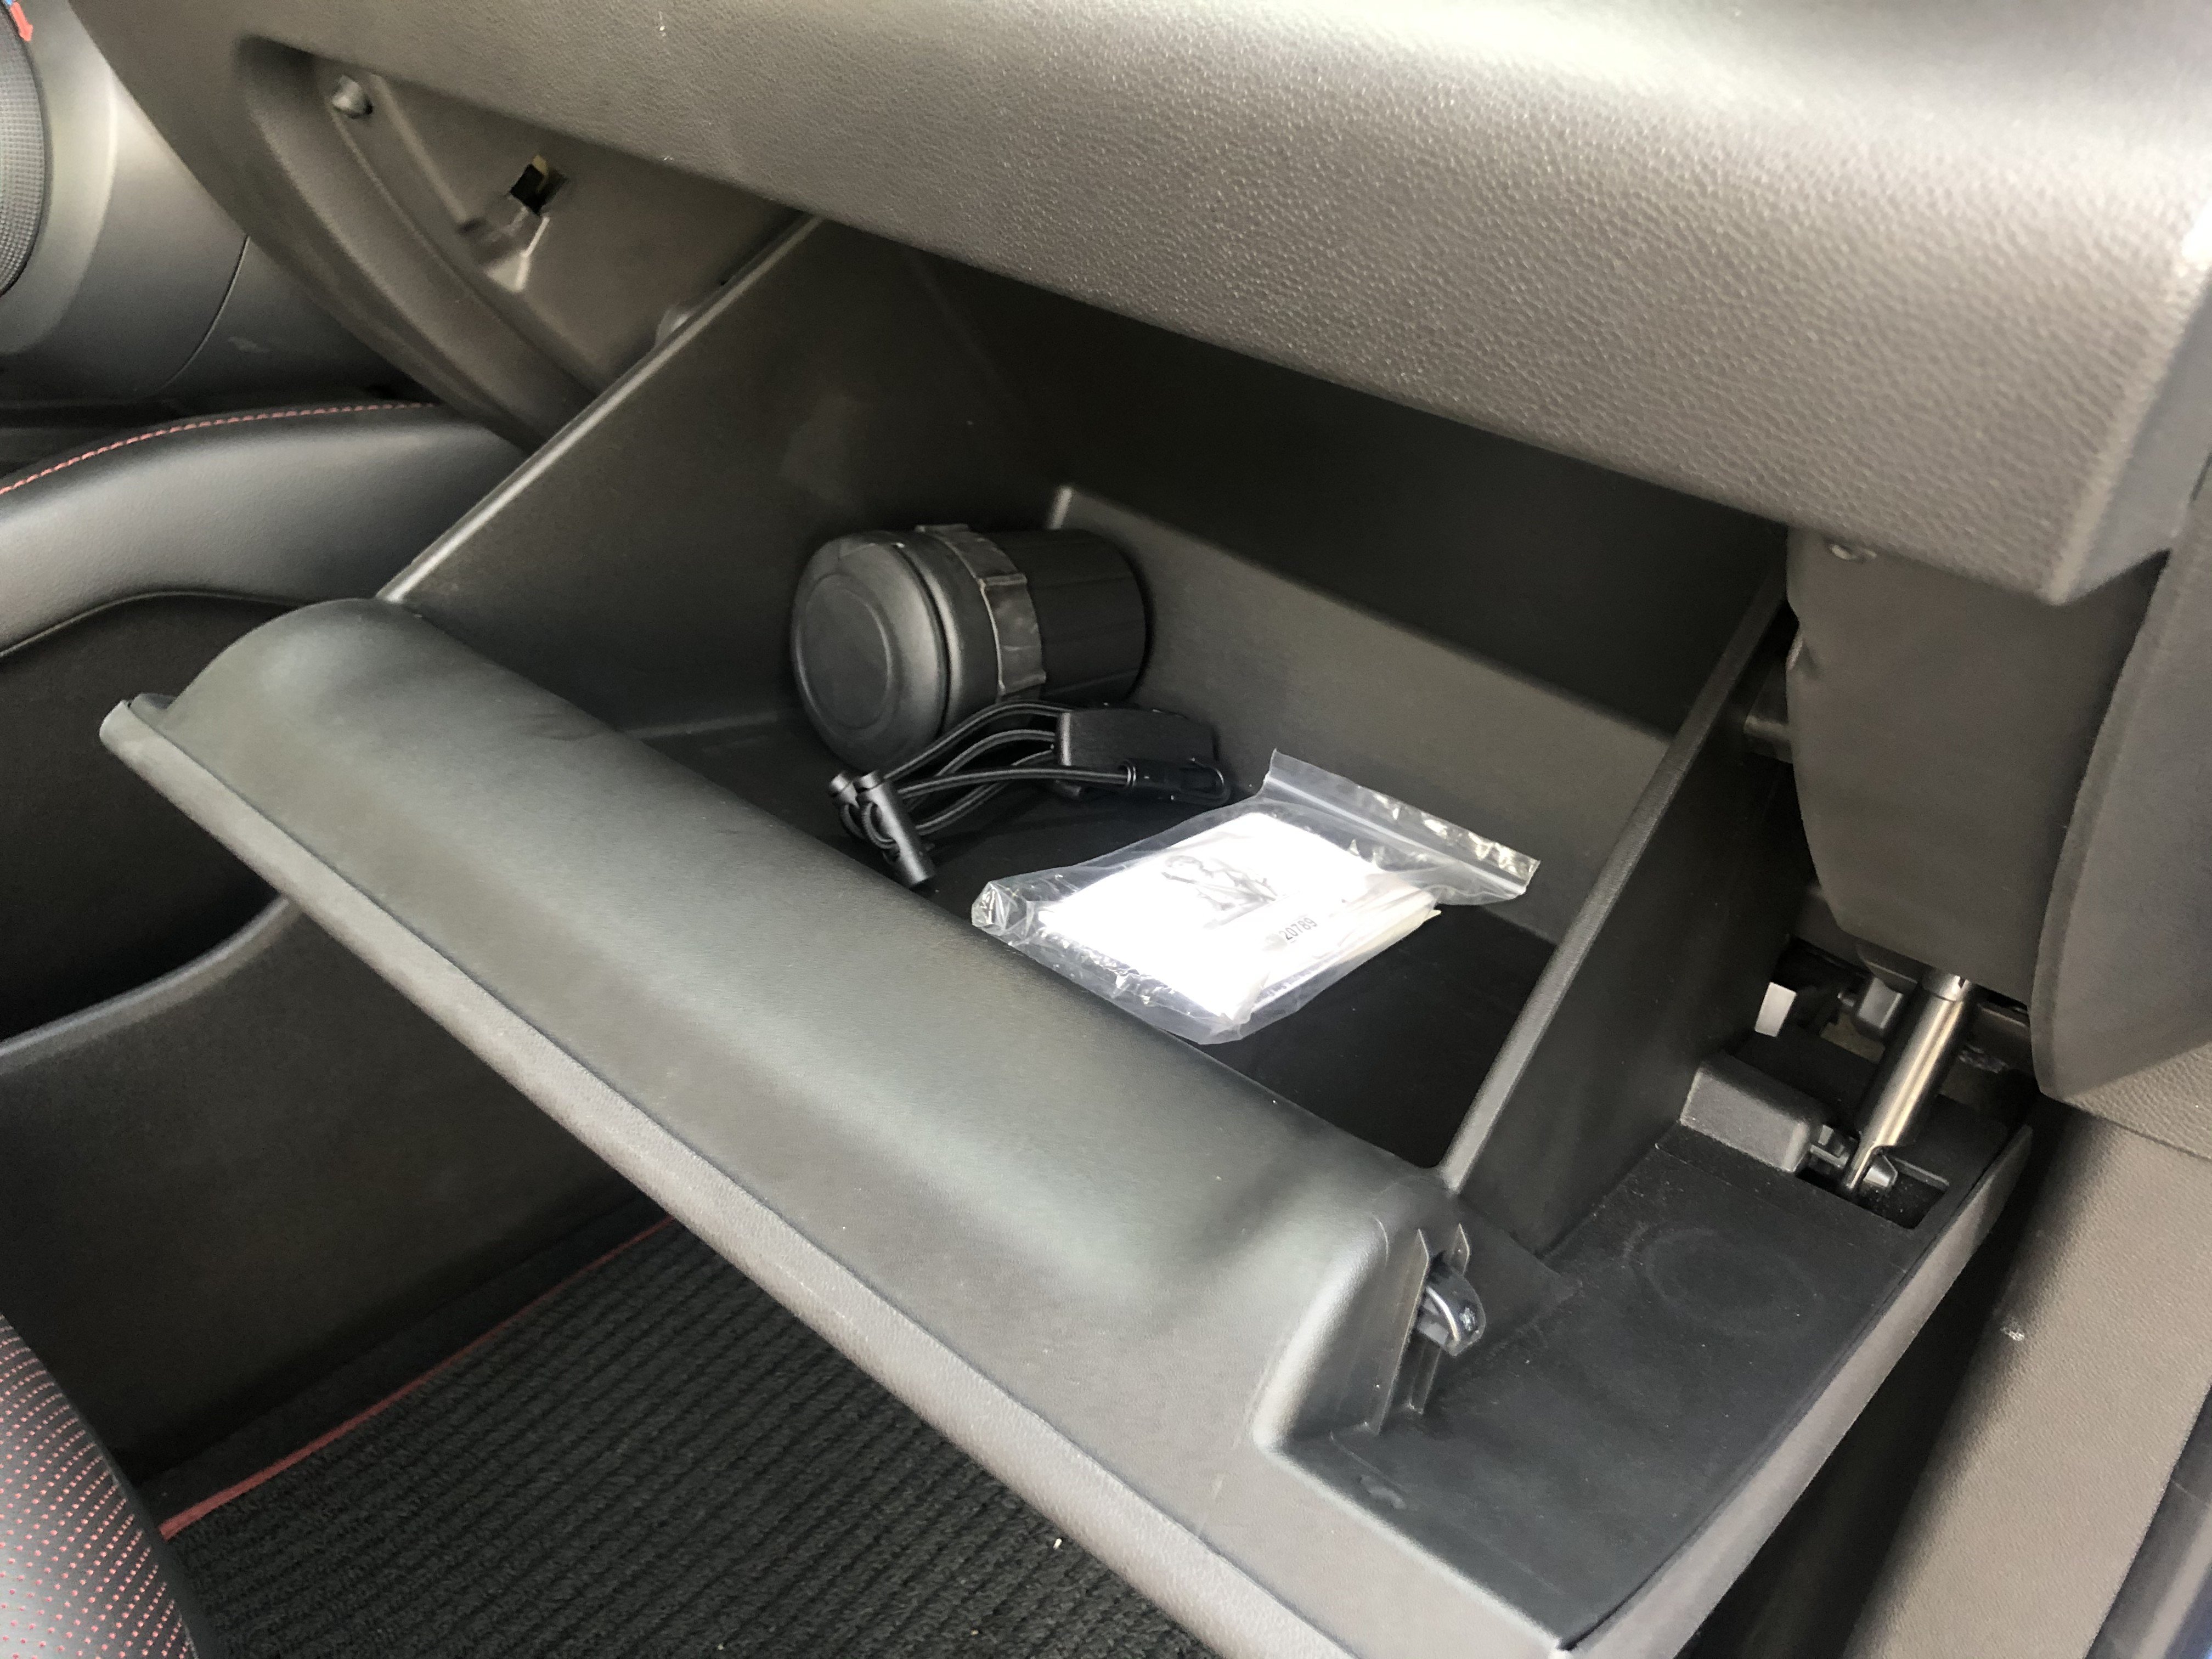 Chevrolet Blazer 2019 is the first Chevrolet to install a glove box that can be locked electronically called the Valet Mode. The compartment is spacious enough for a small handbag.